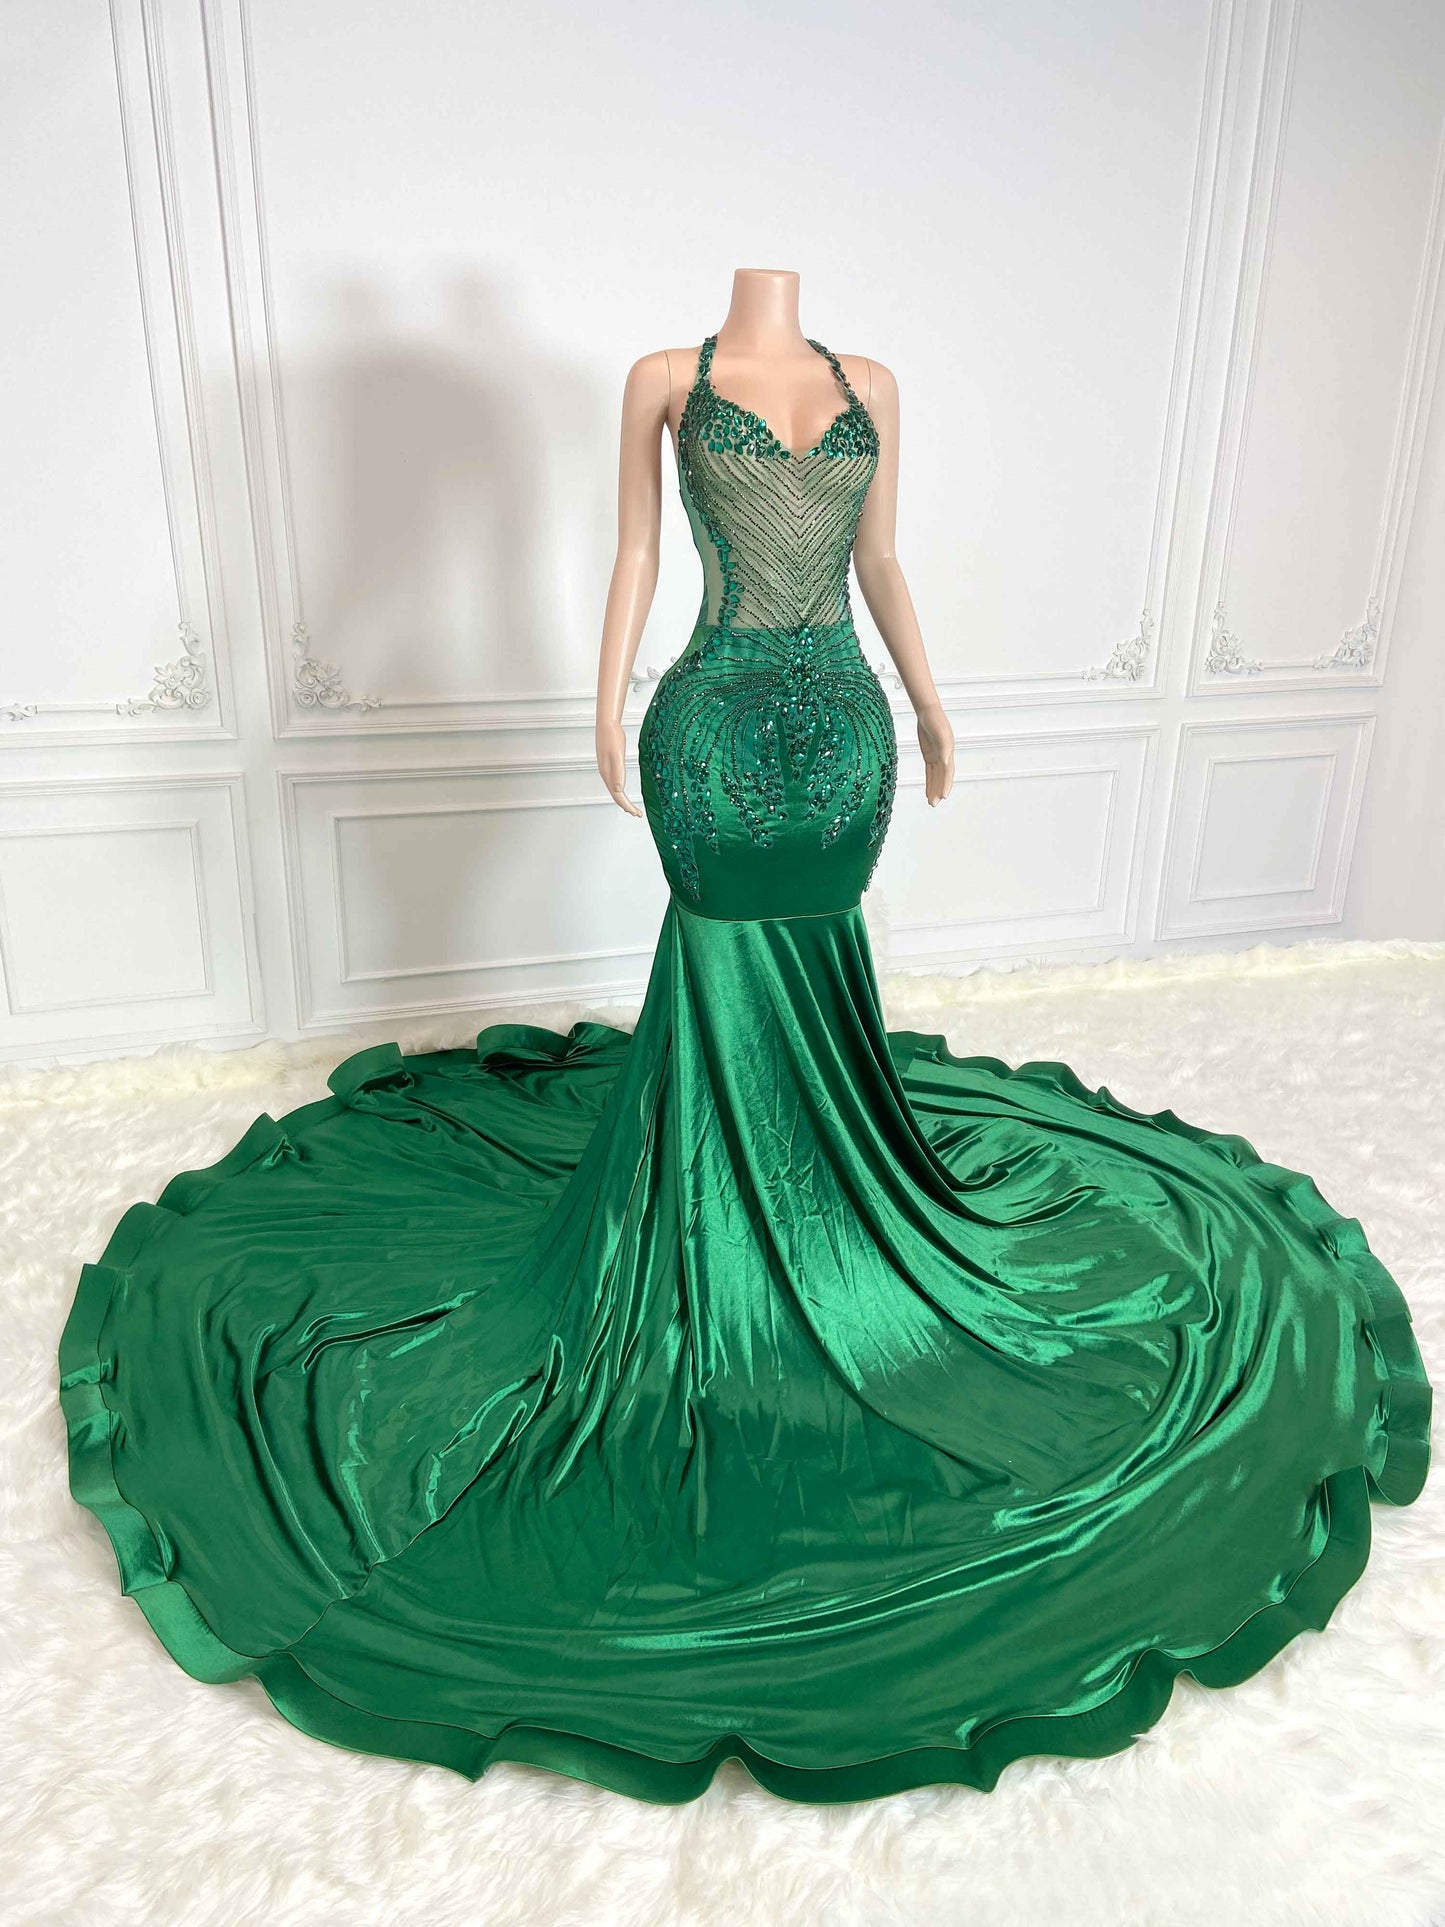 “Beauty” Gown